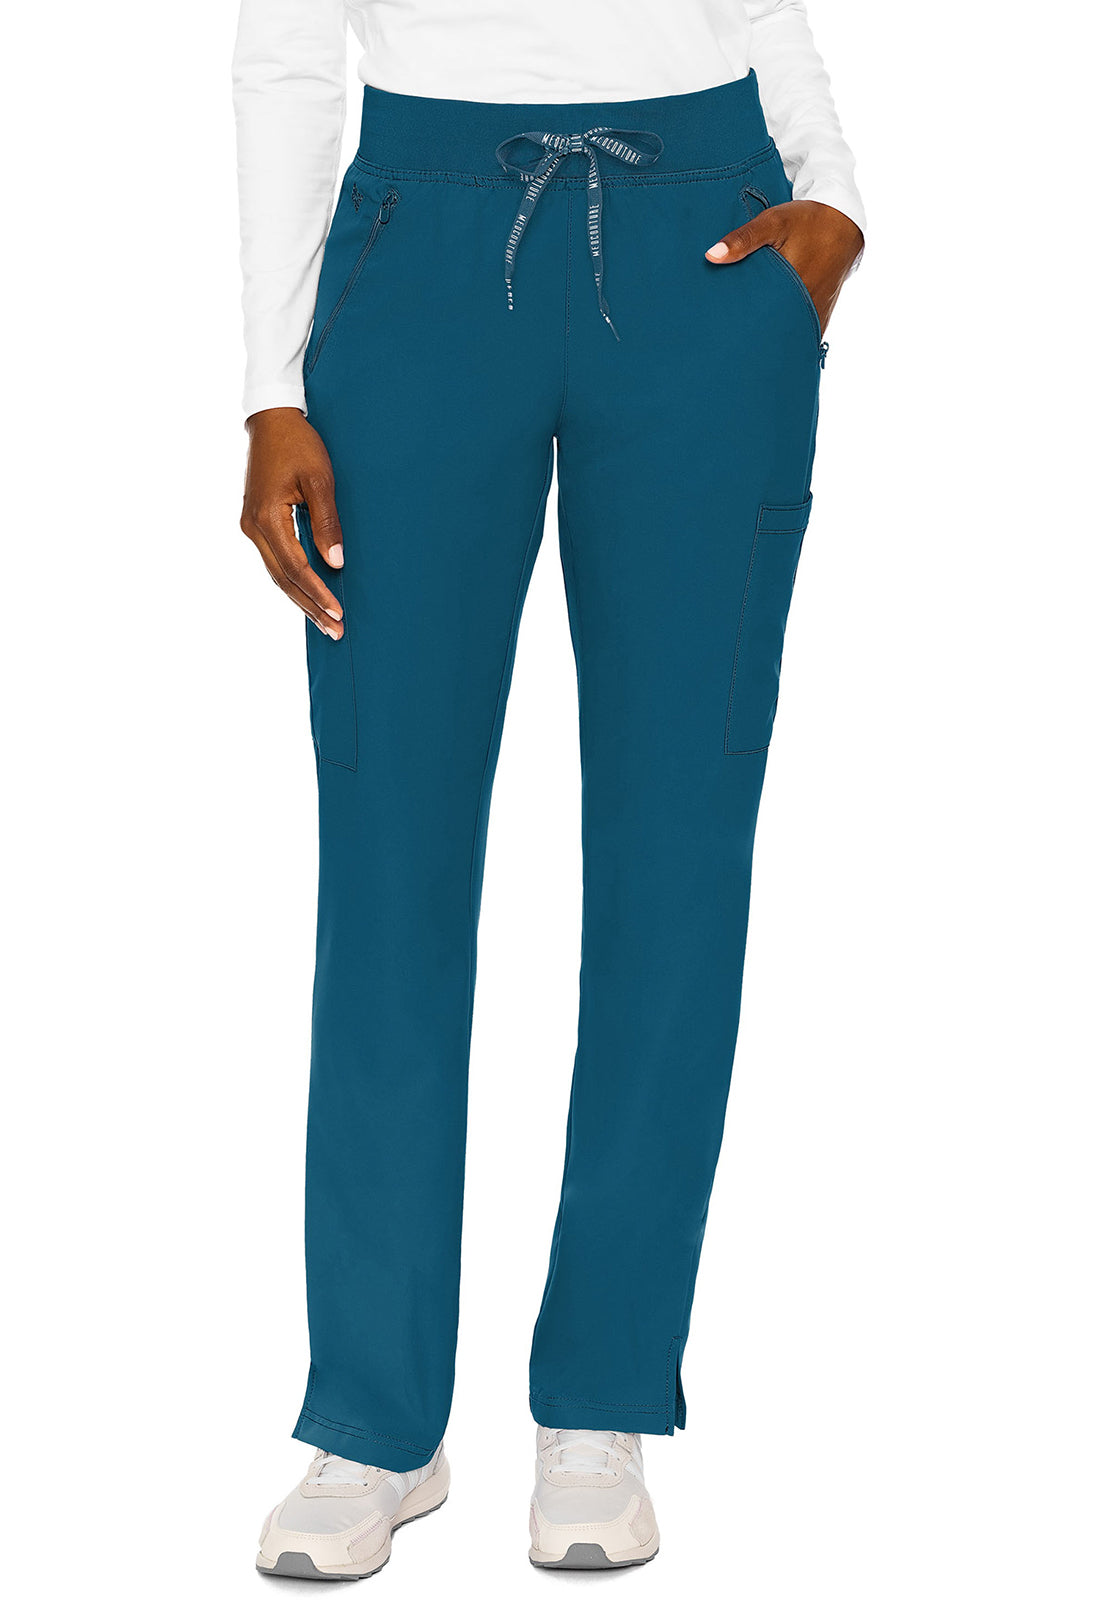 Zipper Pant Lightweight by Med Couture (Petite) XS-5XL / Caribbean